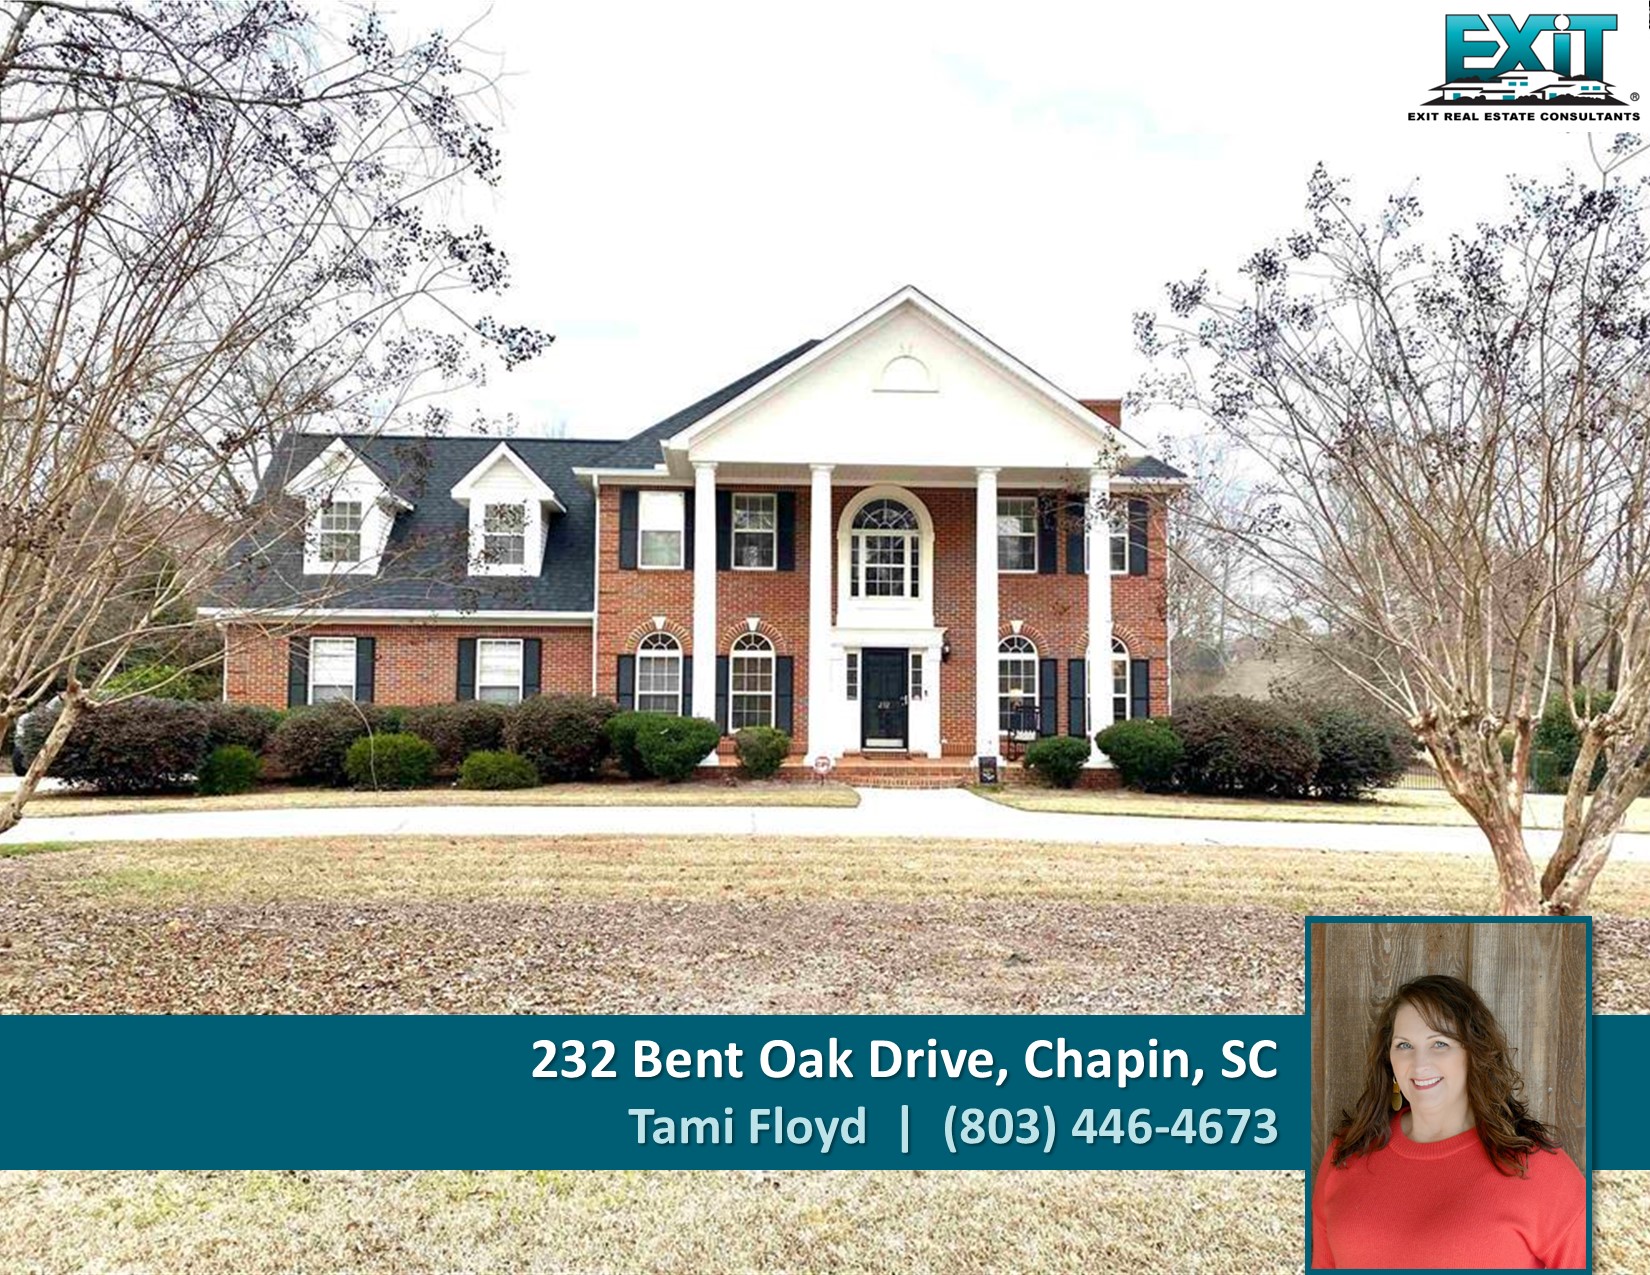 Just listed in The Oaks - Chapin